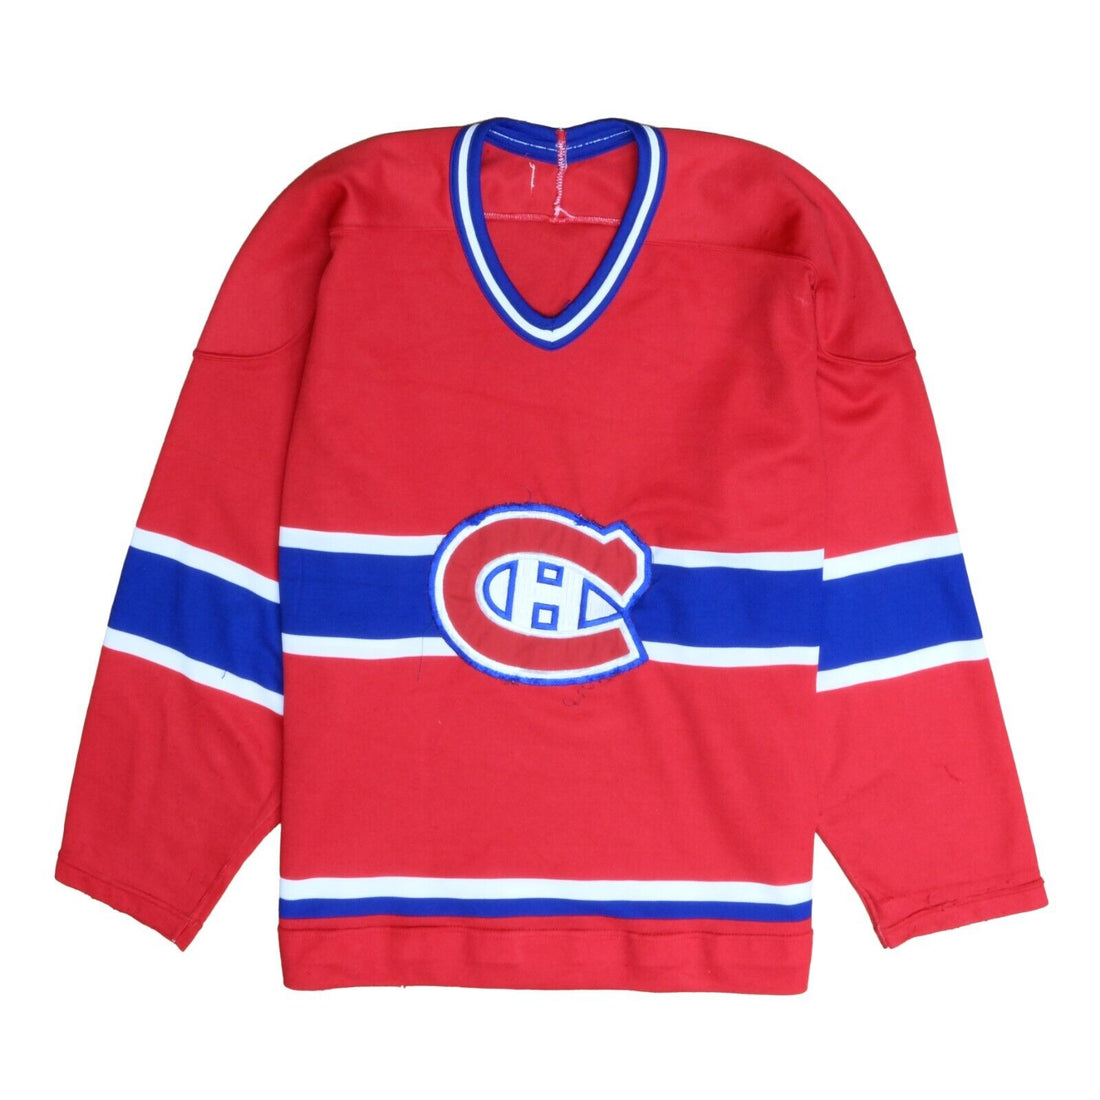 Vintage Montreal Canadiens CCM Maska Jersey Size 2XL Red 90s NHL